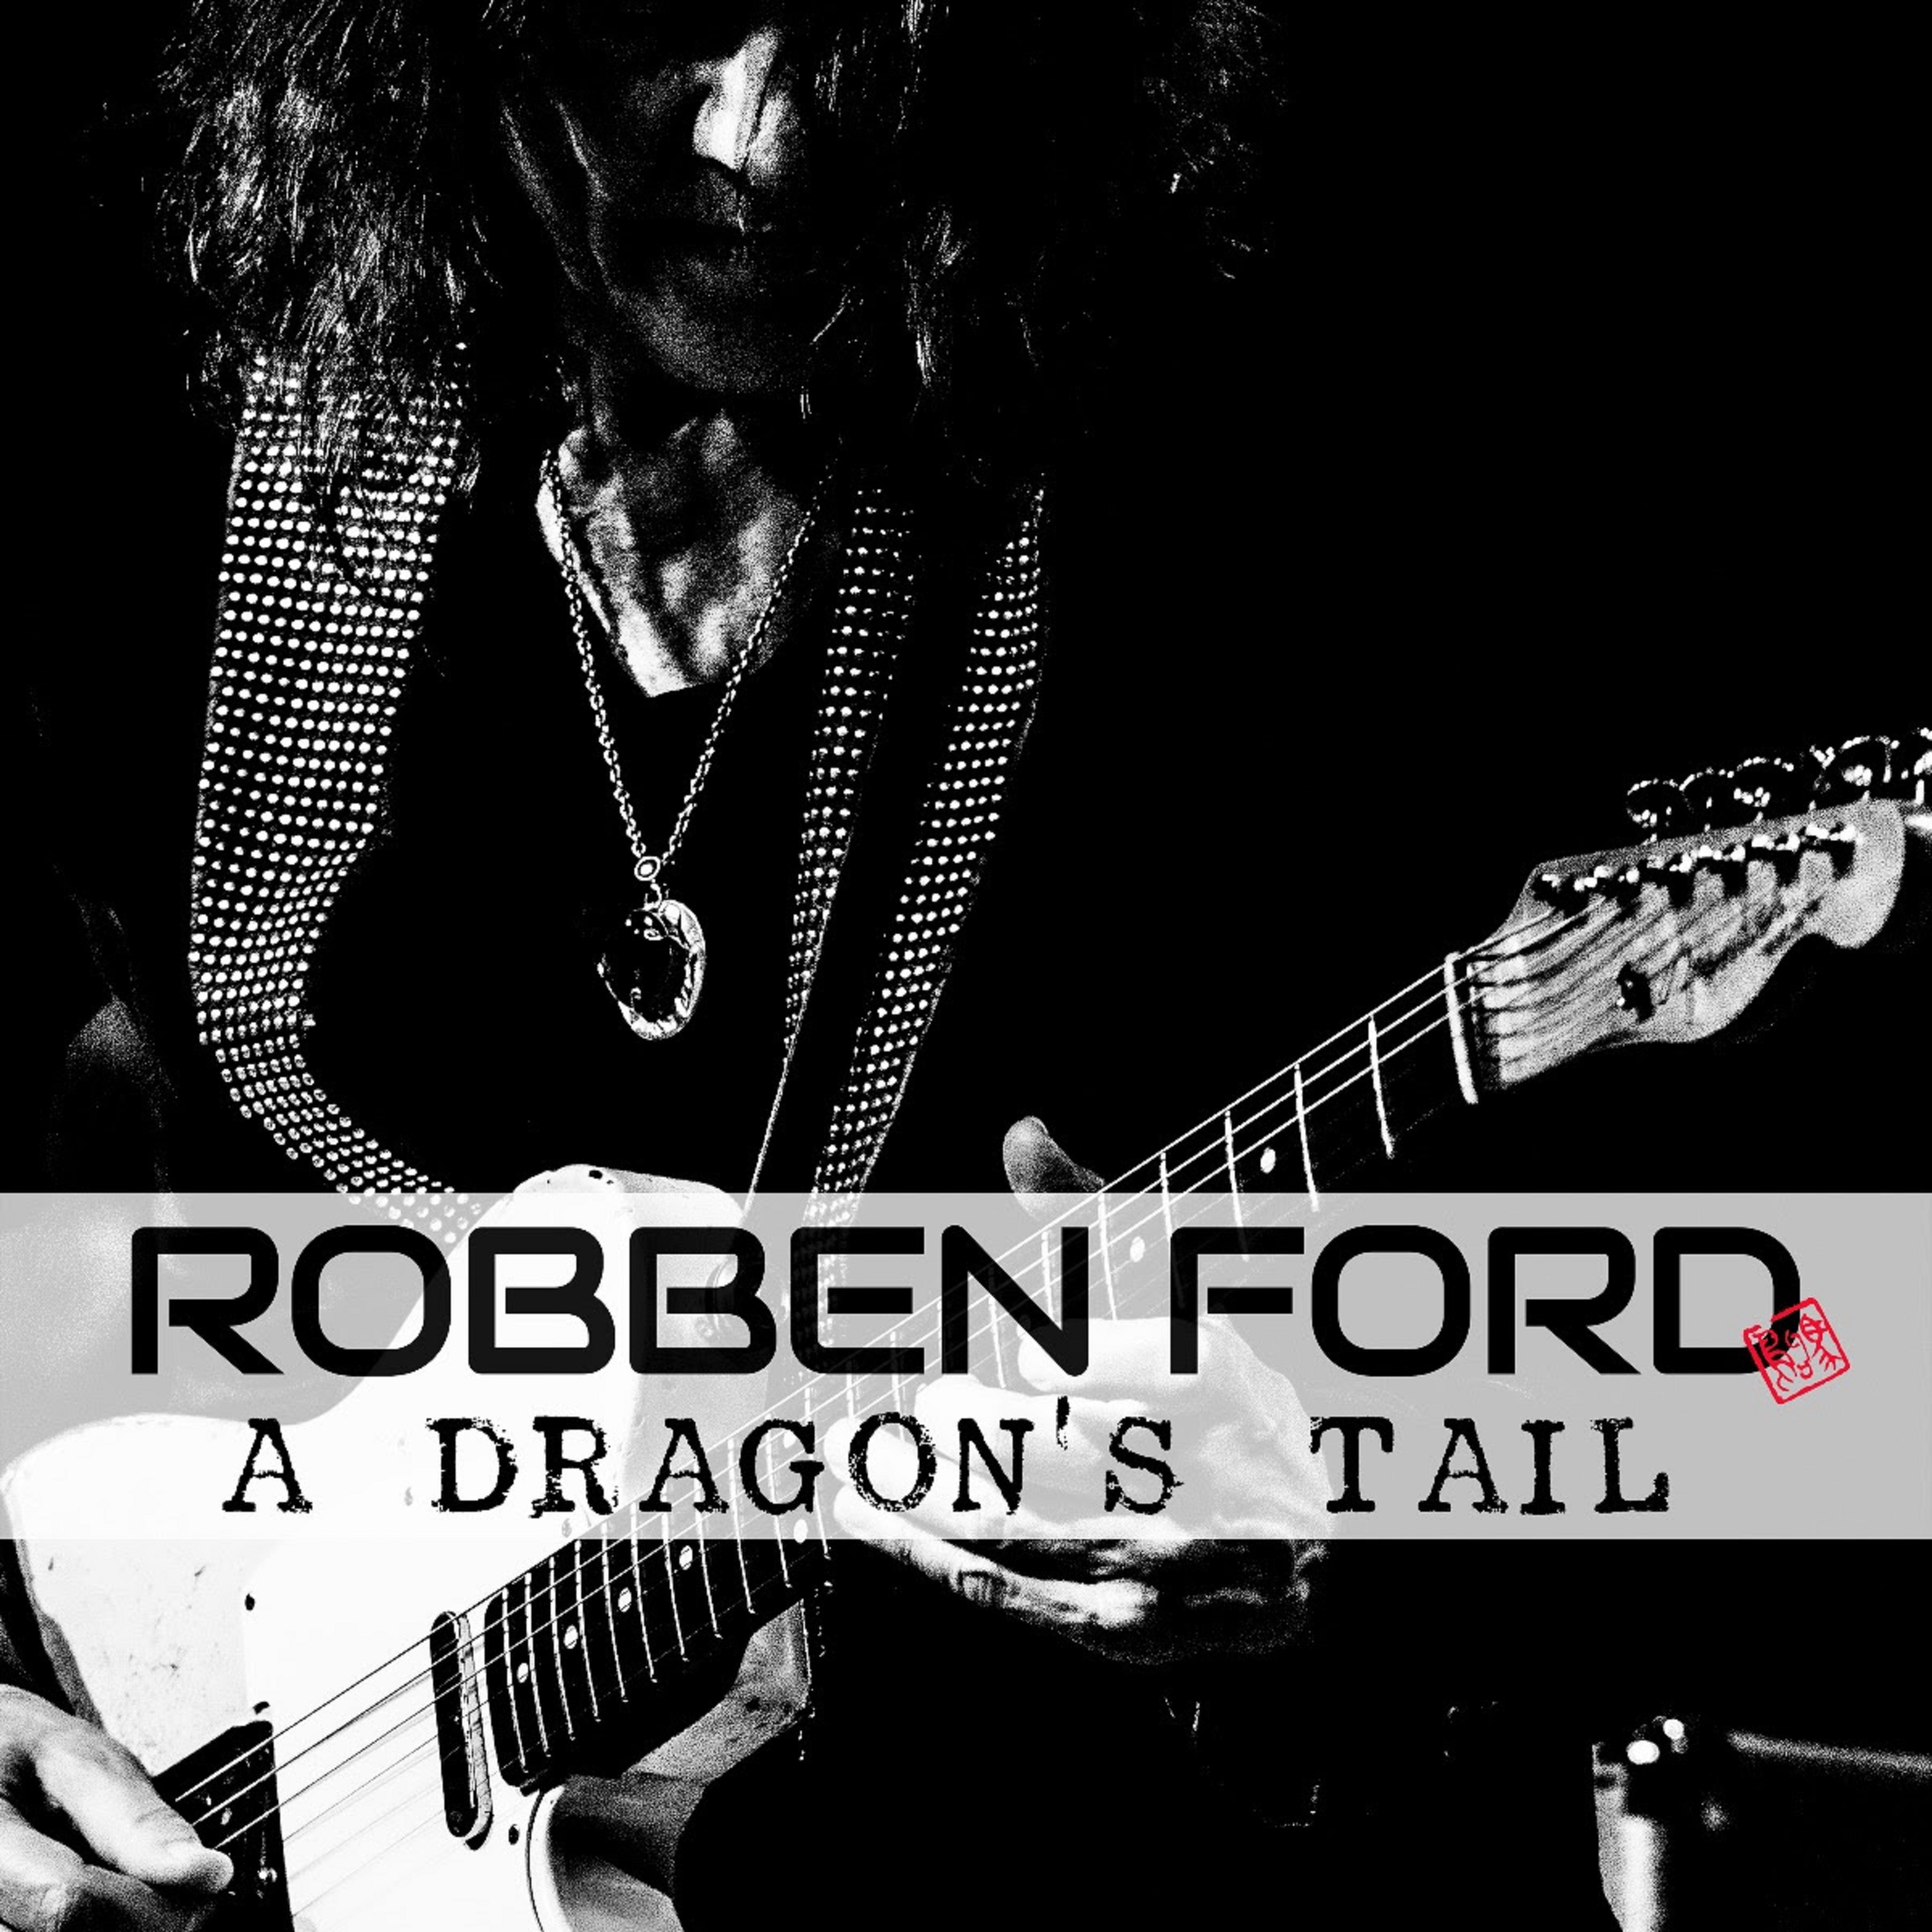 Robben Ford to Release New Single - Tour dates Announced